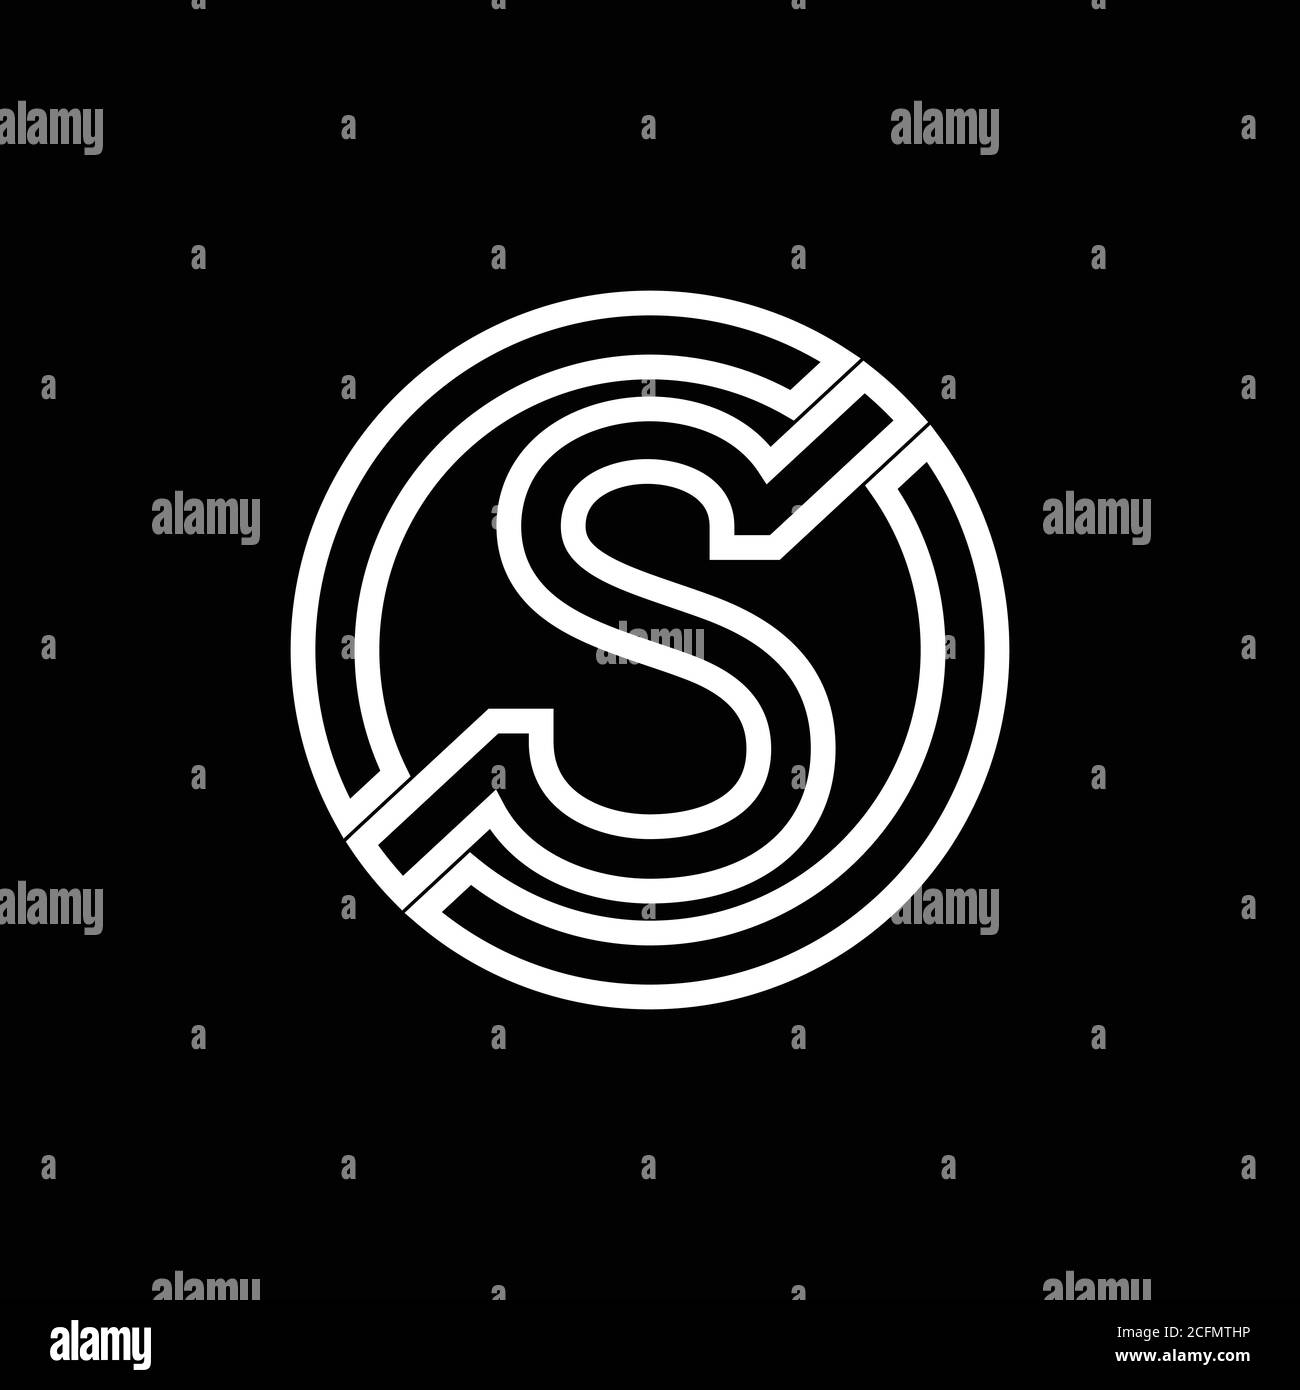 Initial Letter S Logo With Creative Circle Monogram Business Typography Vector Template. Creative Abstract Letter S Logo Design Stock Vector